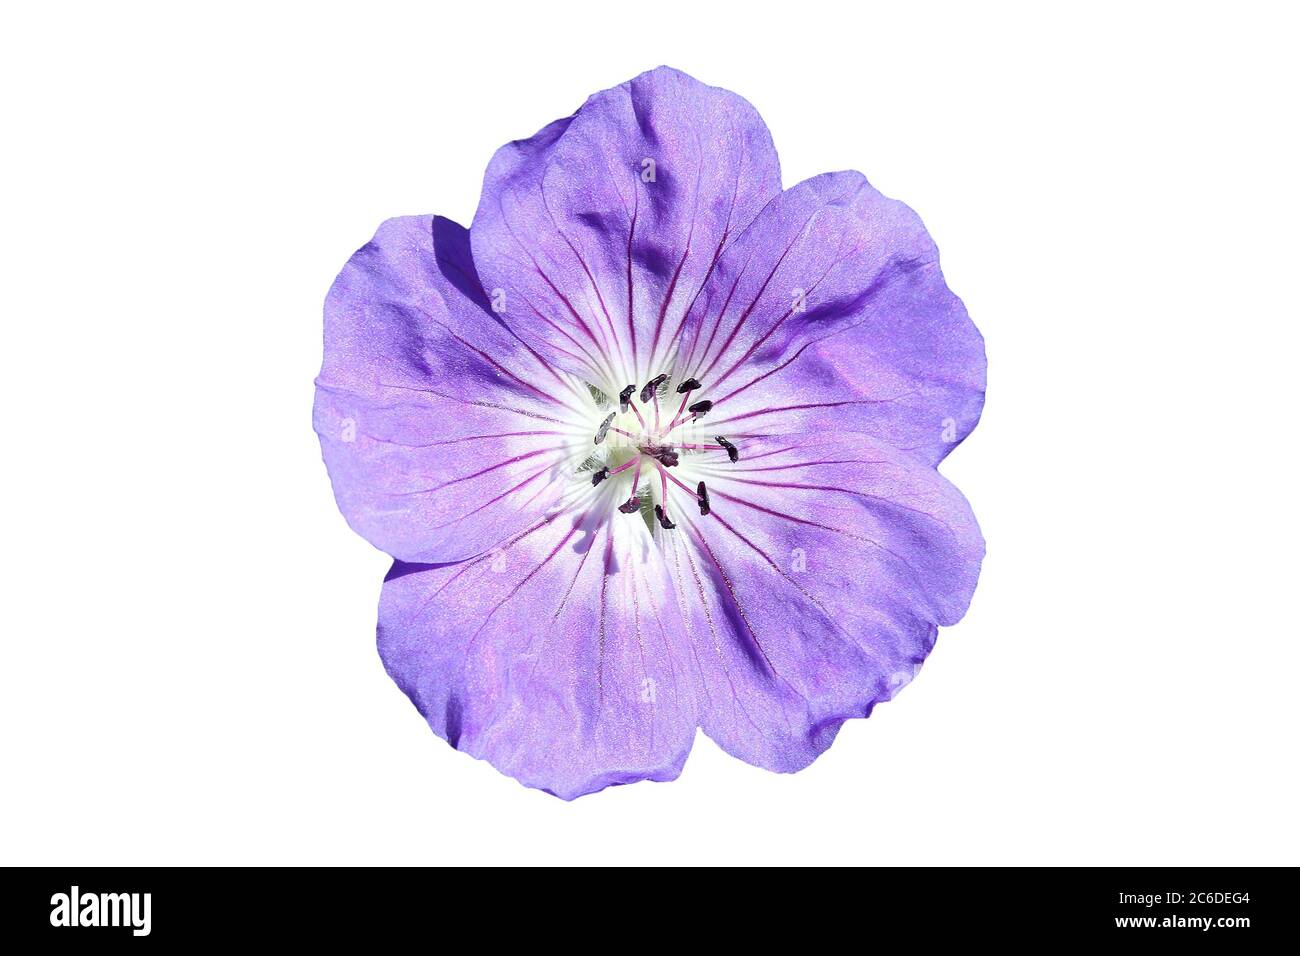 Geranium cinereum 'Ballerina' flower cut out and isolated on a white background Stock Photo